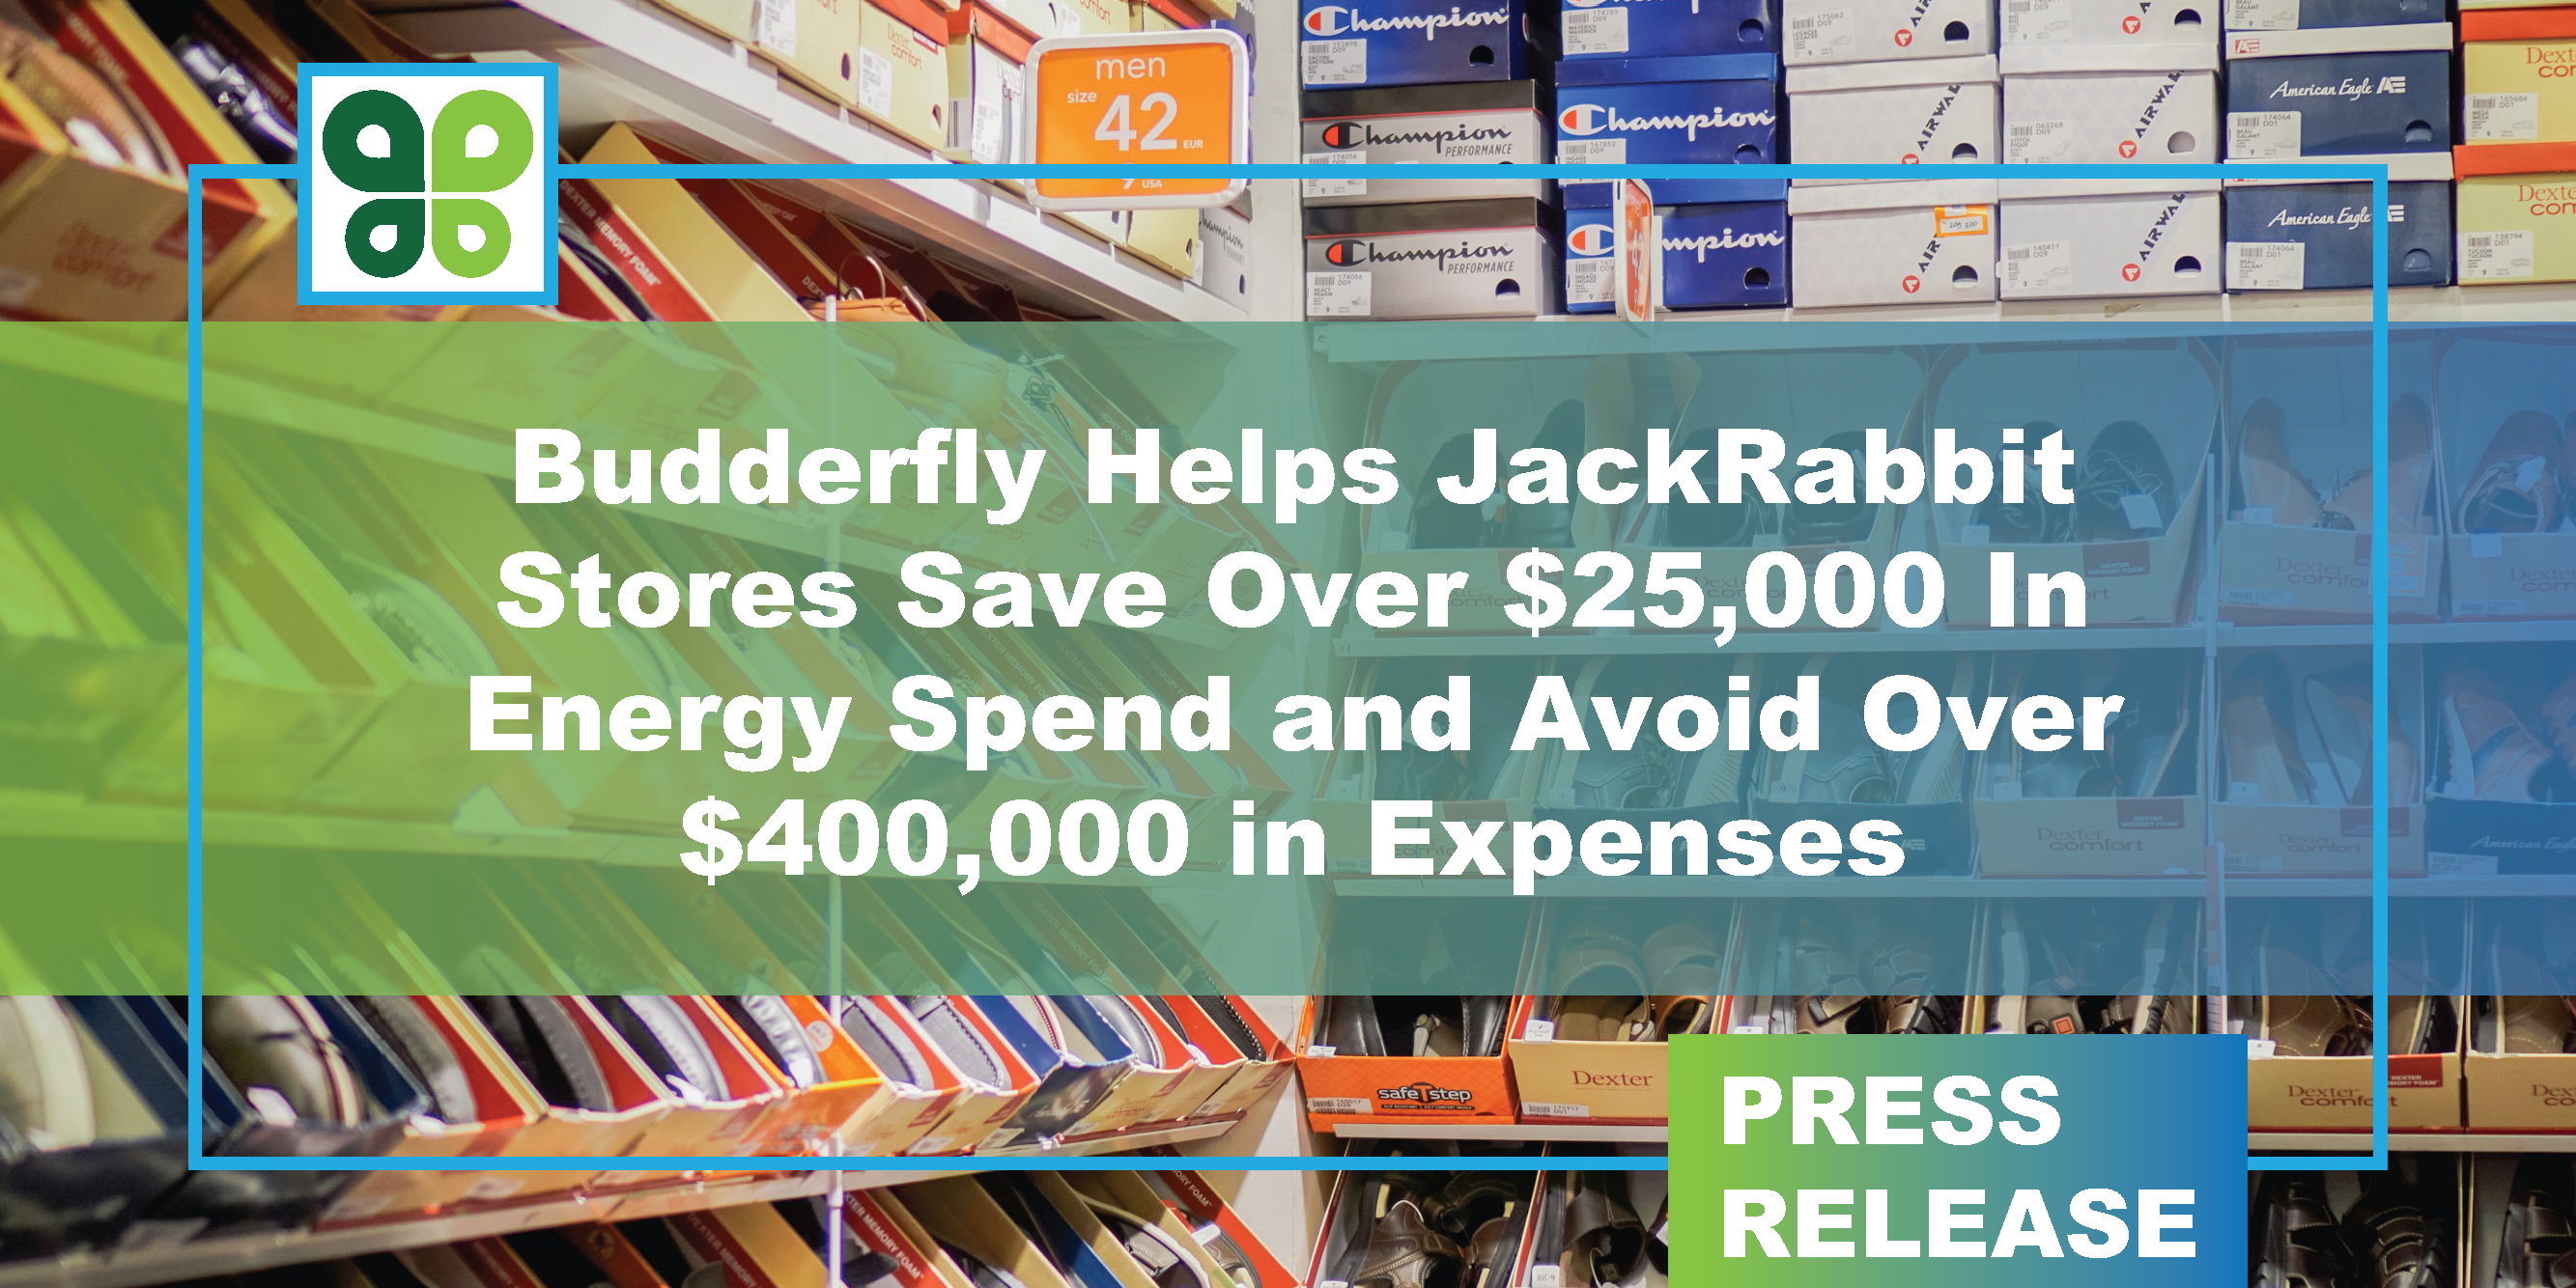 Budderfly Helps JackRabbit Stores Save Over $25,000 In Energy Spend and Avoid Over $400,000 in Expenses